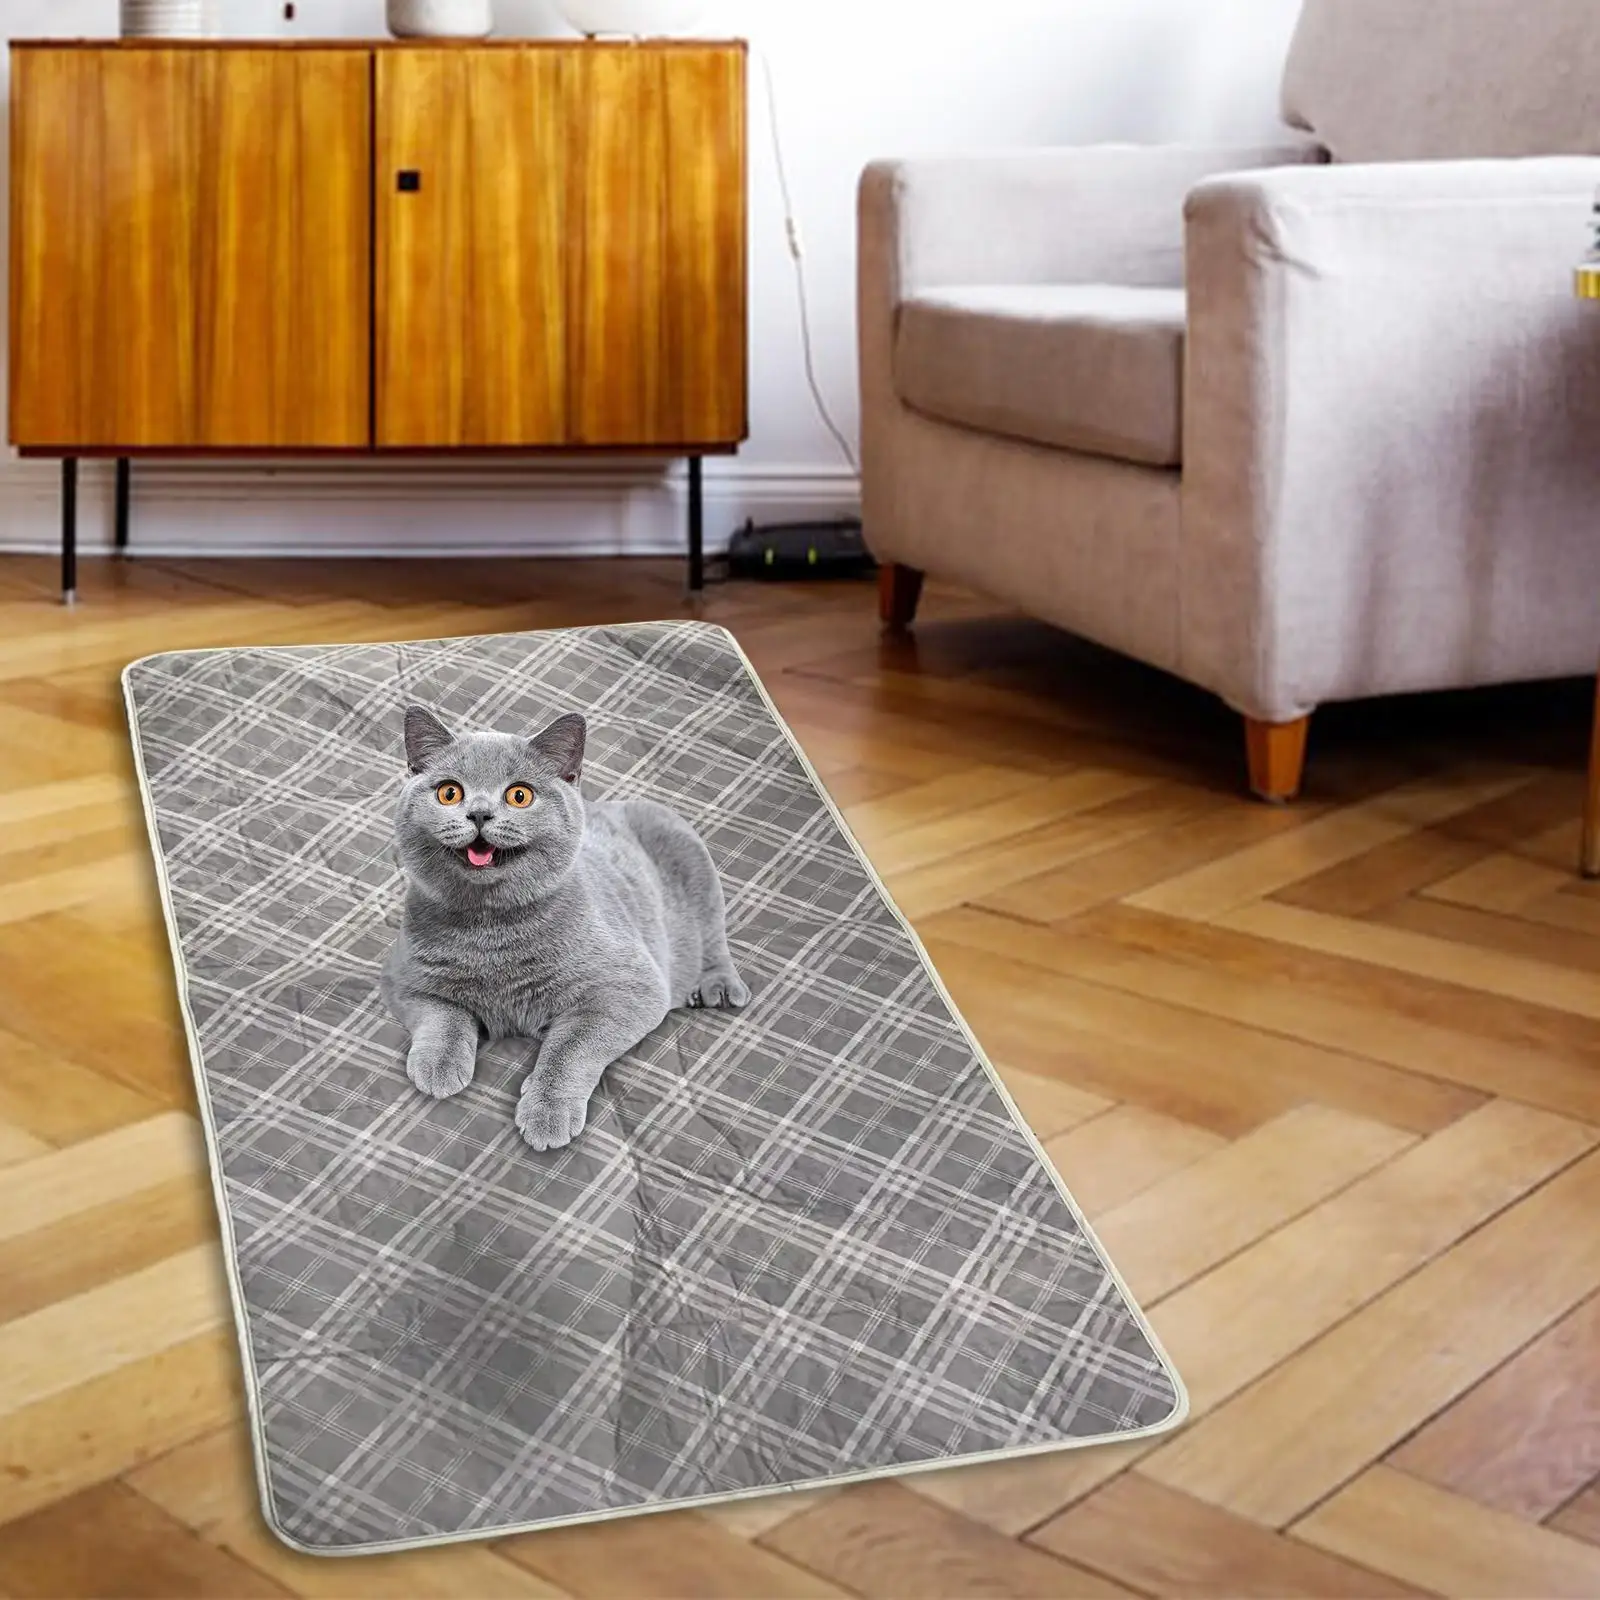 Pet Dog Pee Pad Mat Kitten Absorbent Pad Washable Reusable Cushion Blanket for Kennel Outdoor Crate Home Travel Sleeping Pad